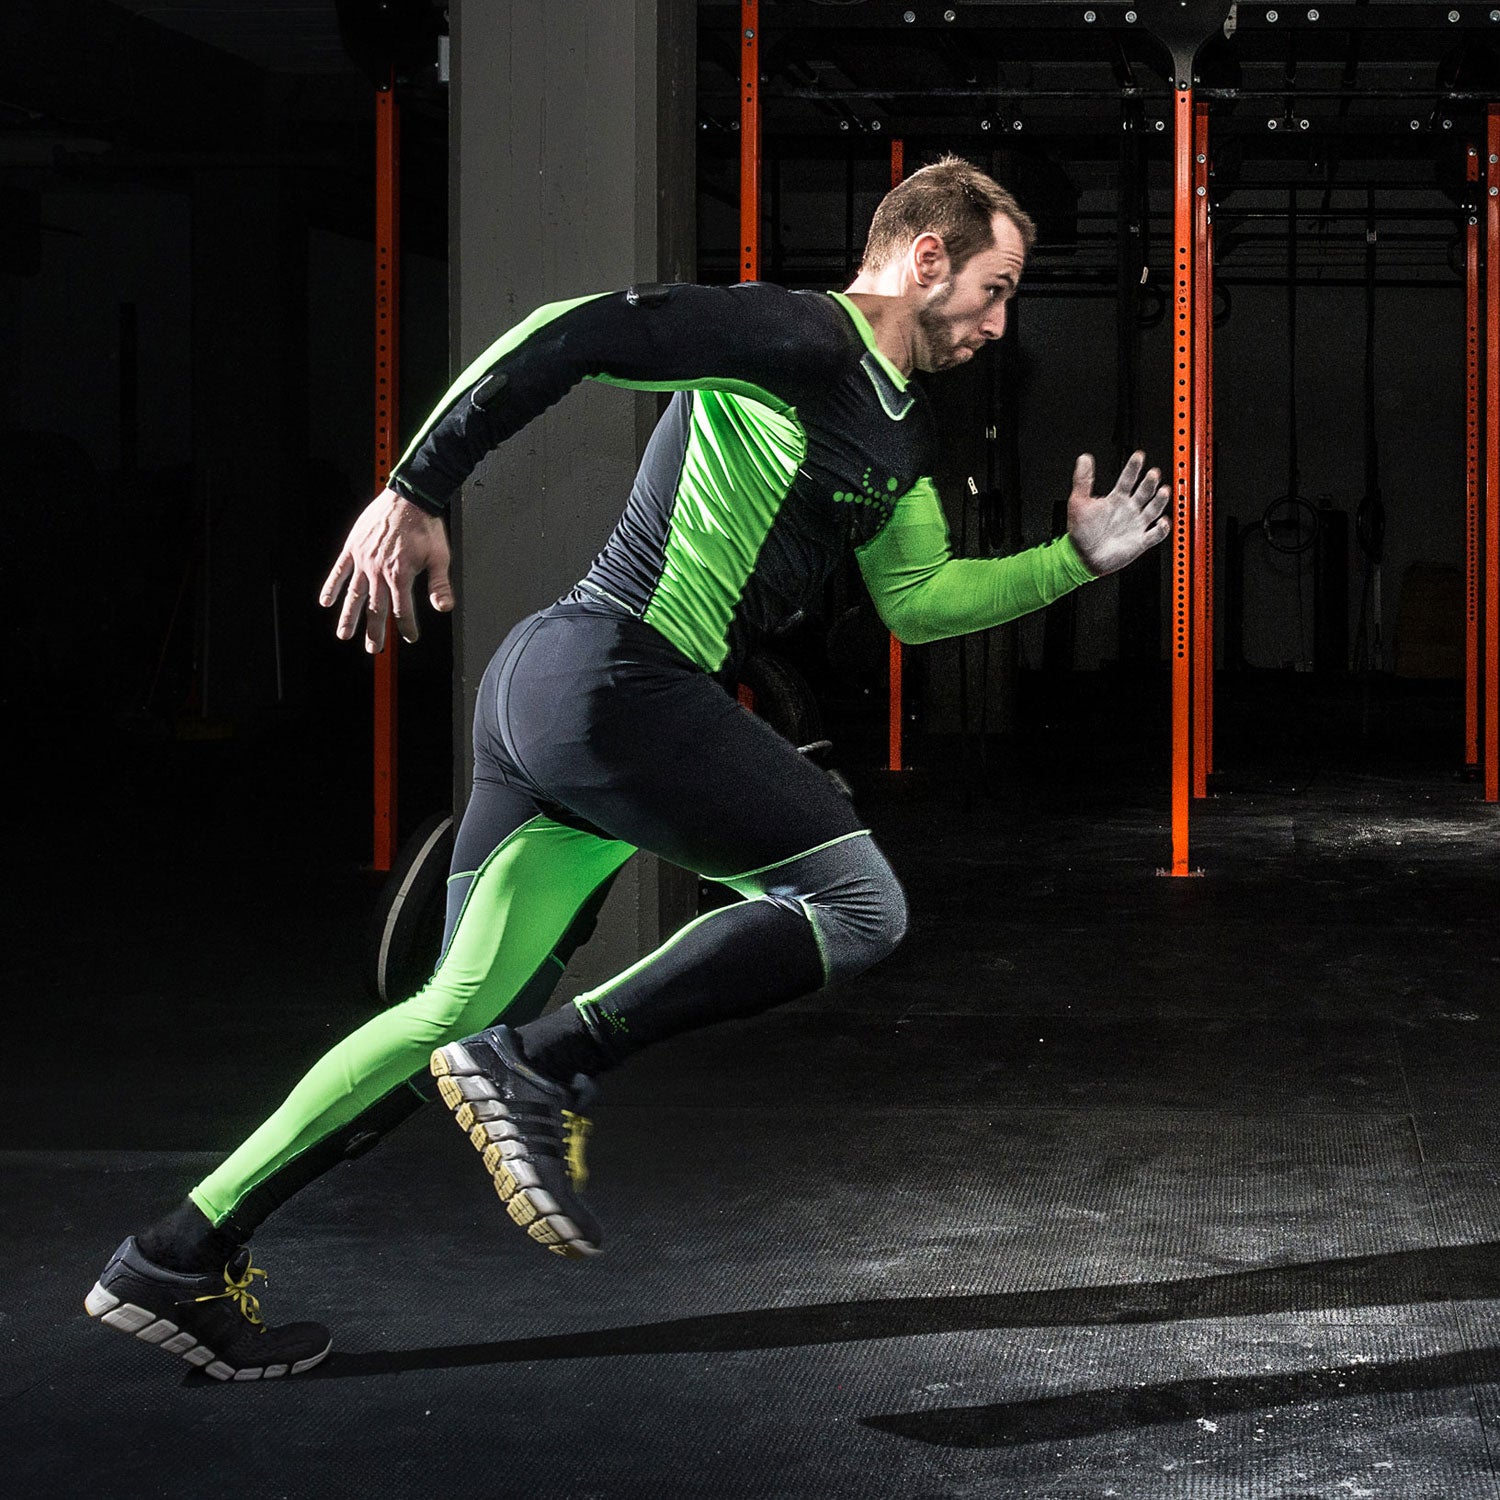 The First Smart Fitness Apparel We're Actually Excited to Own